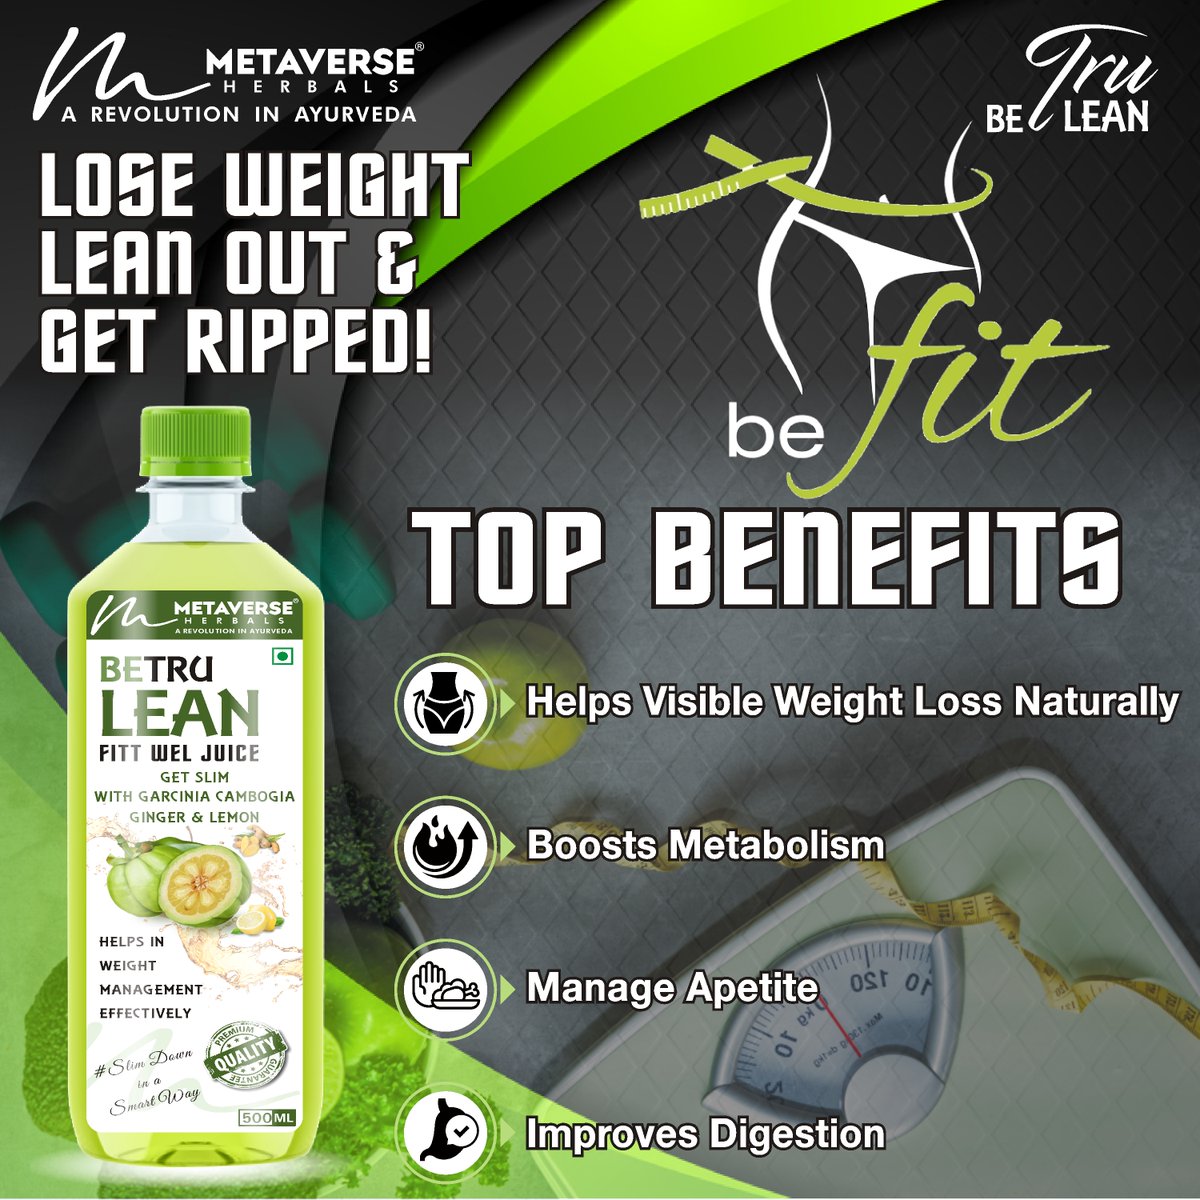 Looking to shed some extra pounds and achieve your weight loss goals? Try Metaverse Betru Lean Slim Juice, a natural and effective way to support your weight loss journey
#metaverse #metaverseherbals #ayurvedicmedicine #naturalhealthcare #naturalremedies #weightlosstips